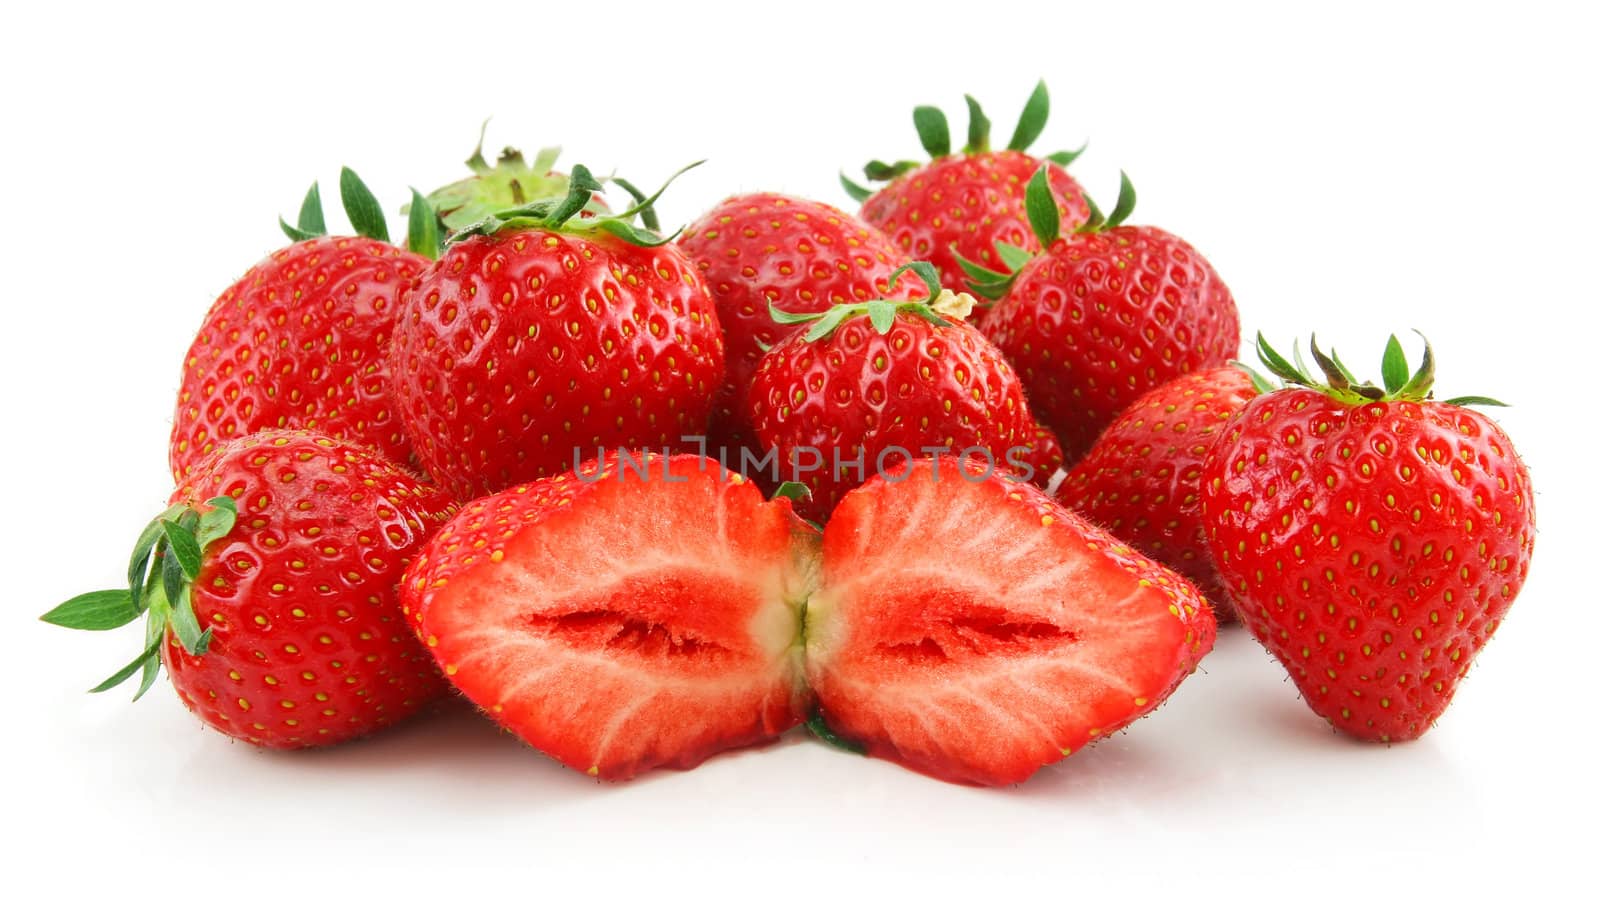 Ripe Sliced Strawberries Isolated on White by alphacell